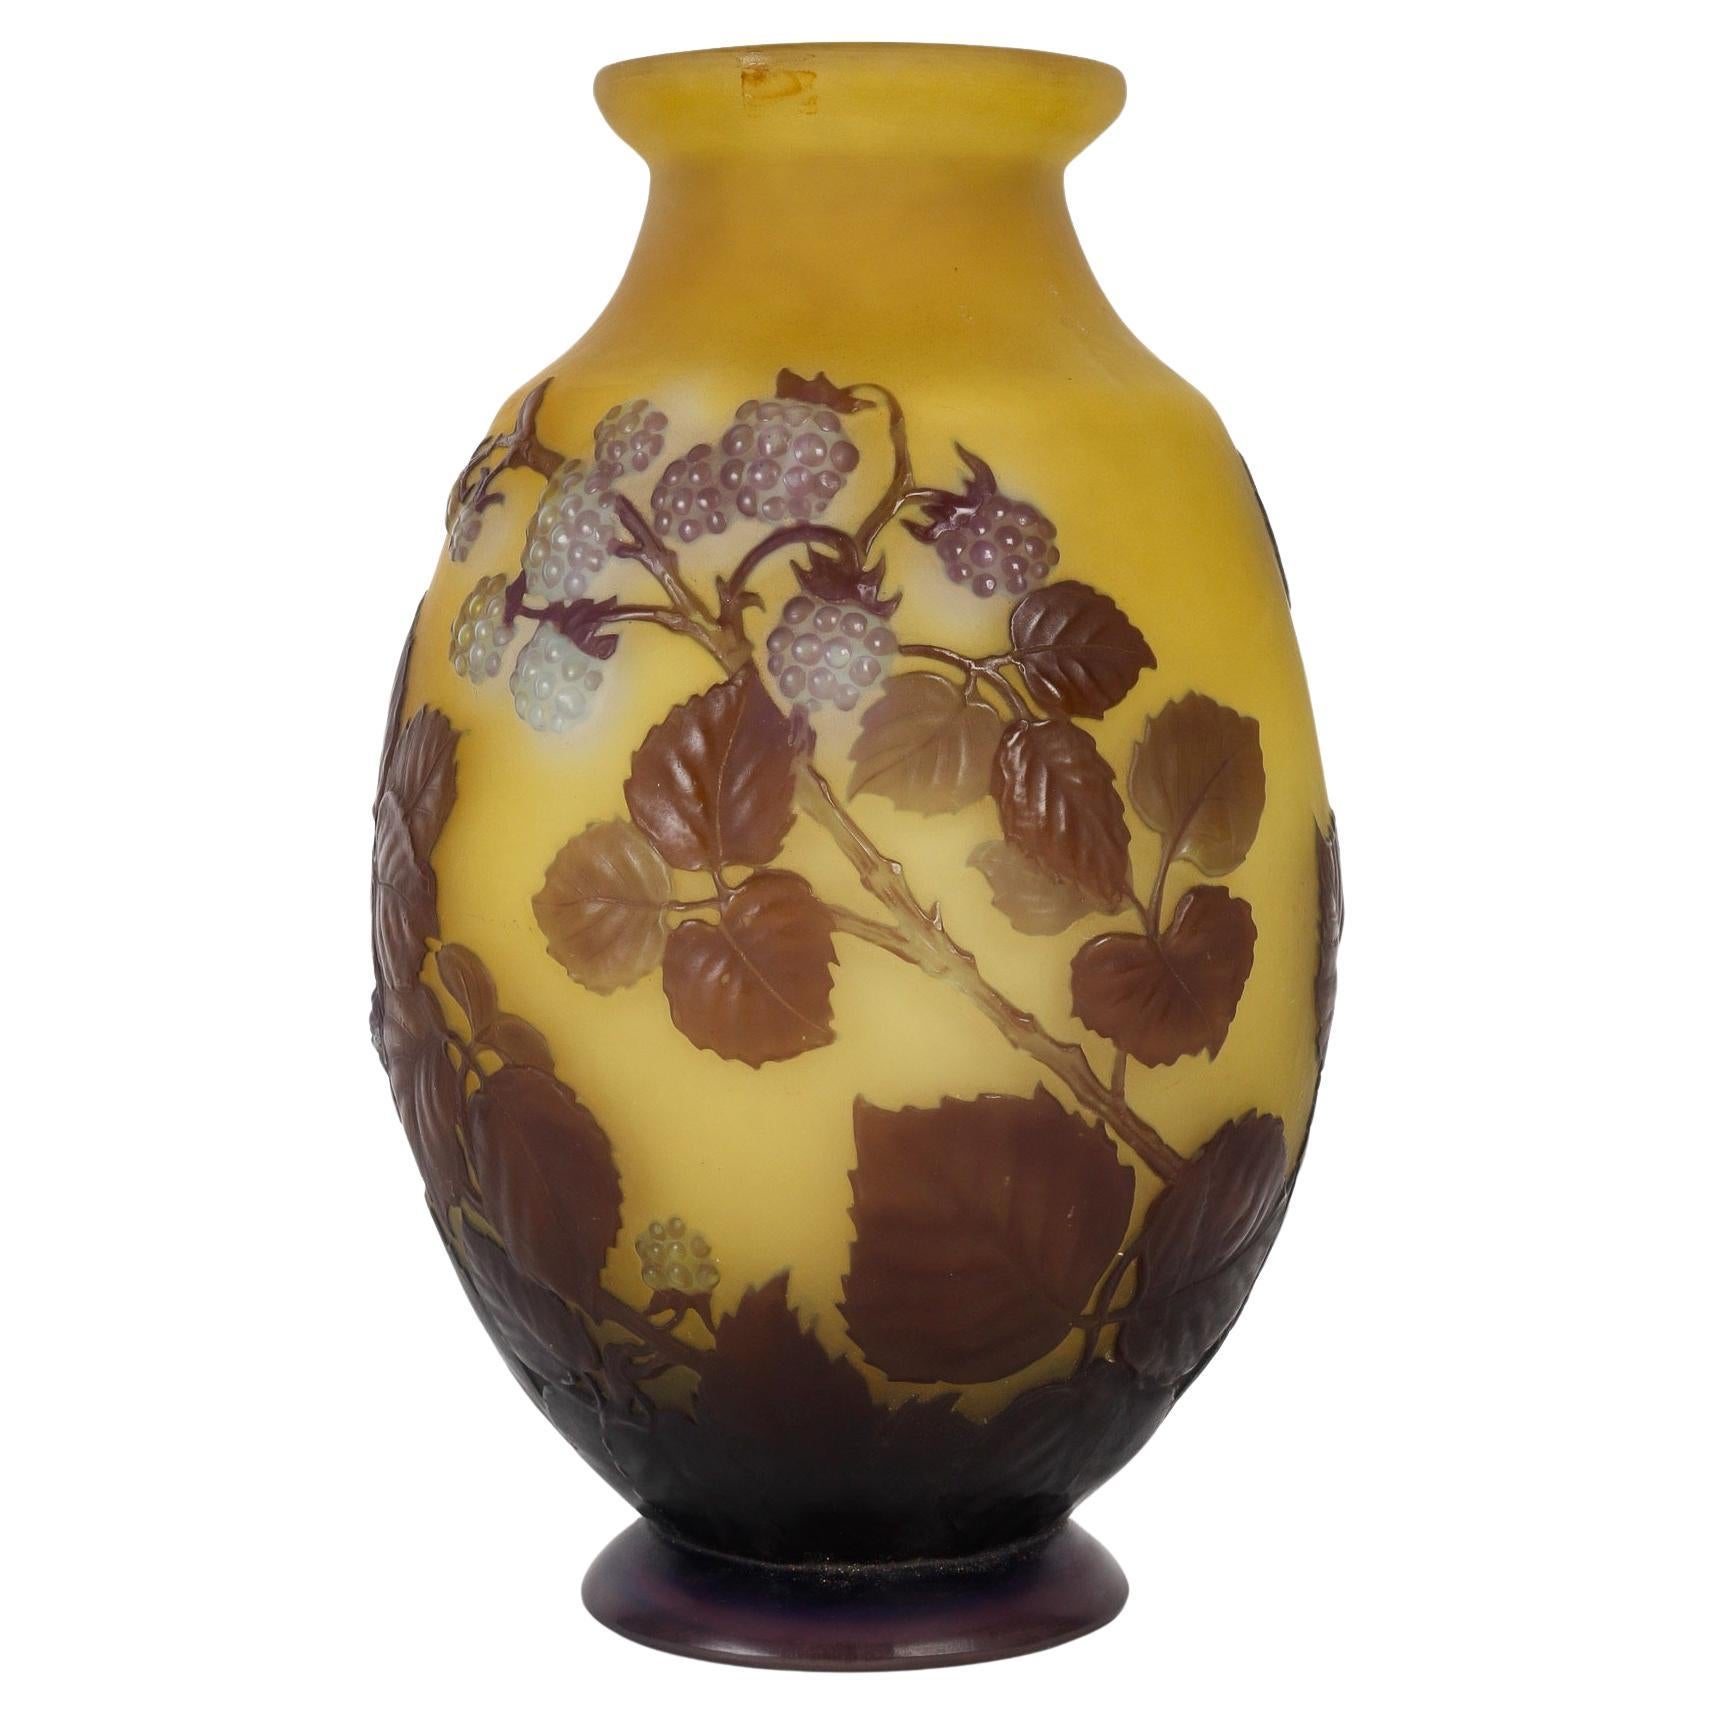 Émile Gallé (1846-1904)
French Art Nouveau Cameo Mold Blown Glass Vase « Framboiser » circa 1910
French mold blown cameo glass in dark blue over yellow with raspberry decoration.
Marked and underlined in cameo 'Gallé', with the «e» greek